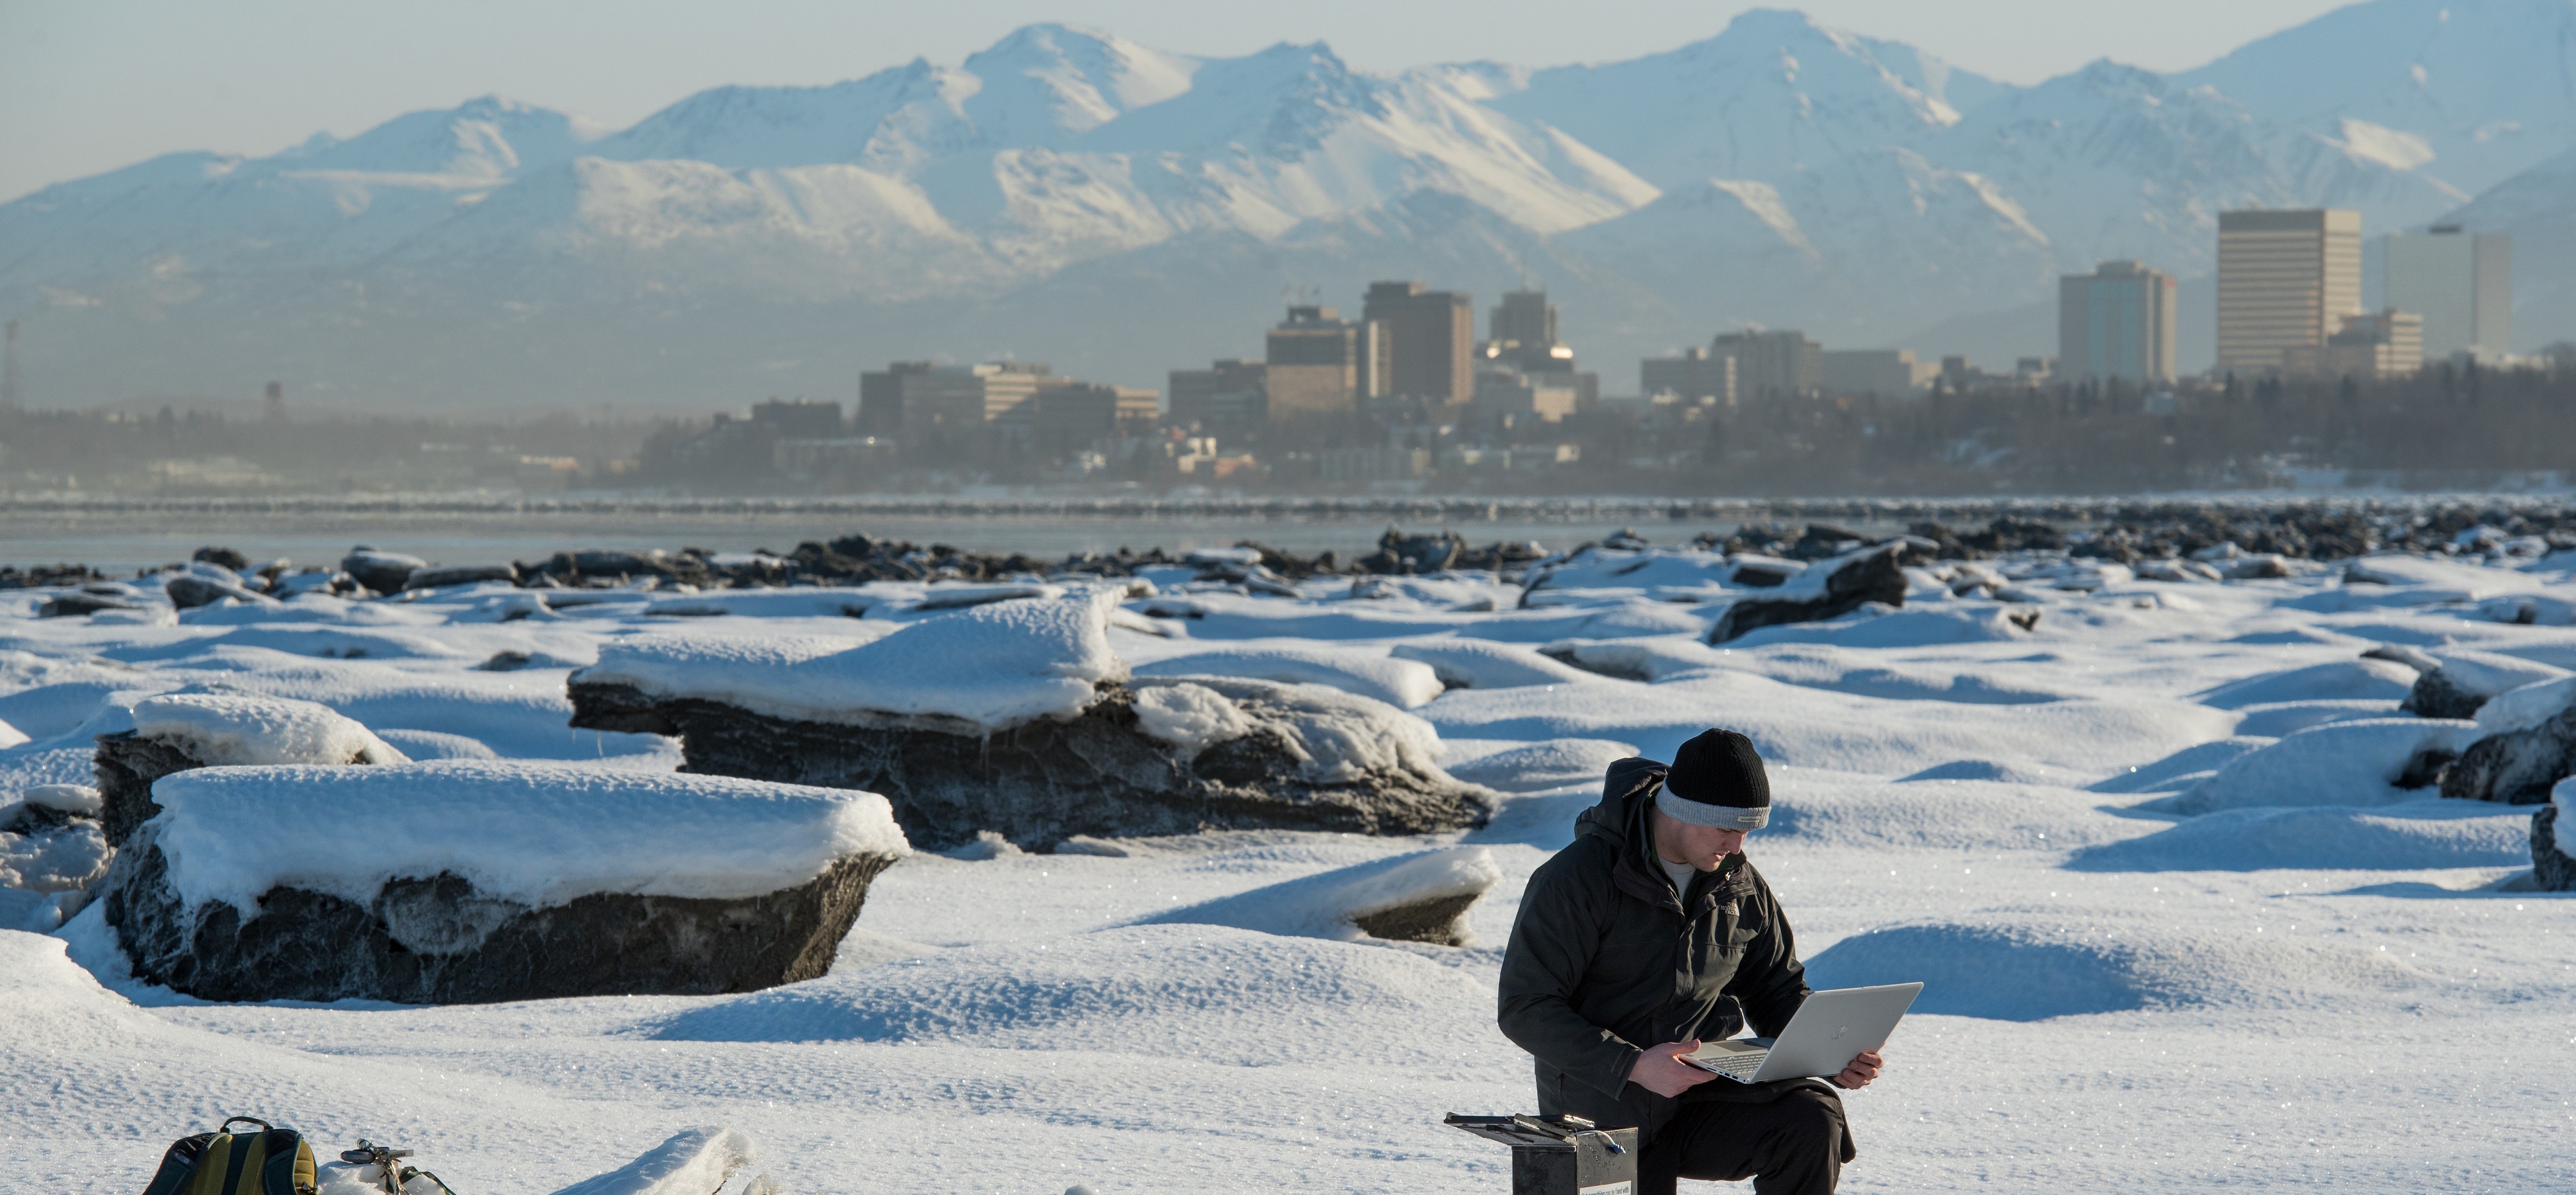 Student conducts research in the snow with Anchorage skyline and mountains in the background